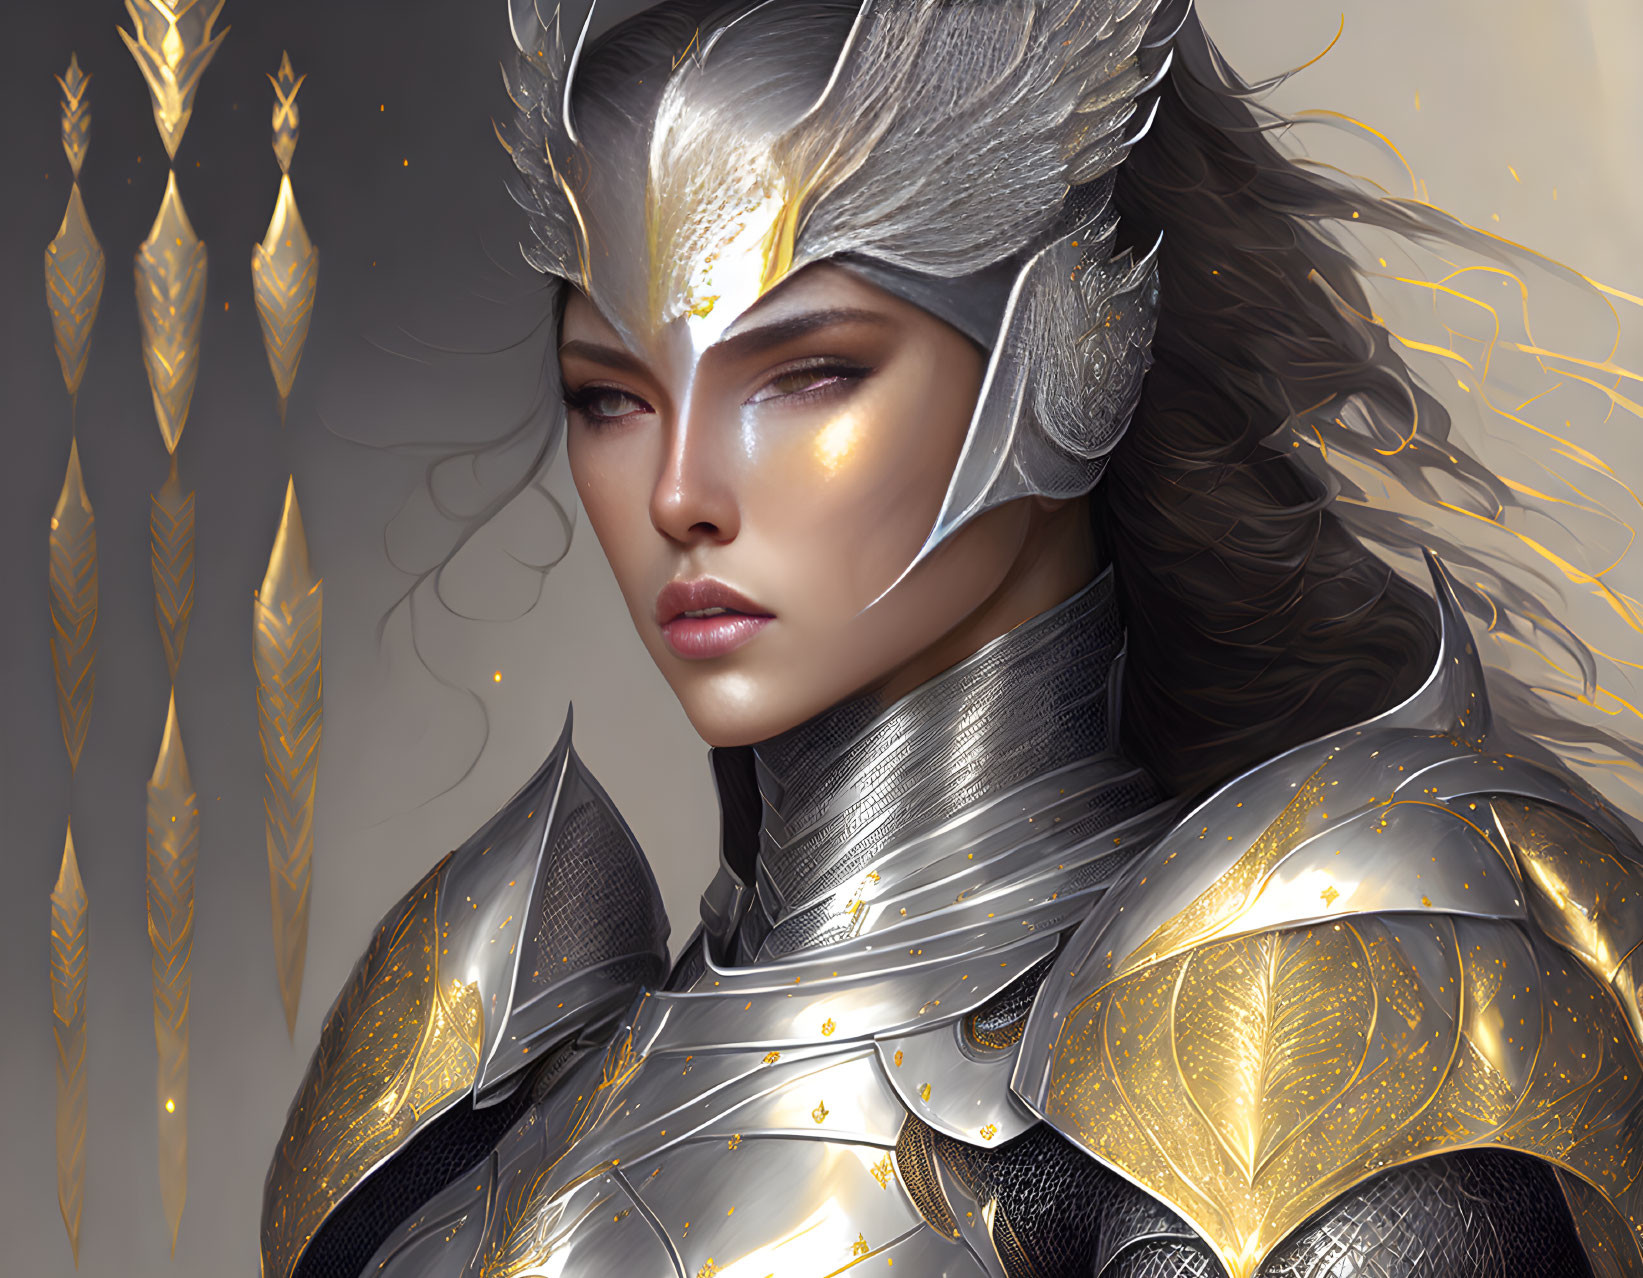 Digital artwork of woman in ornate silver and gold armor with wing motif helmet.